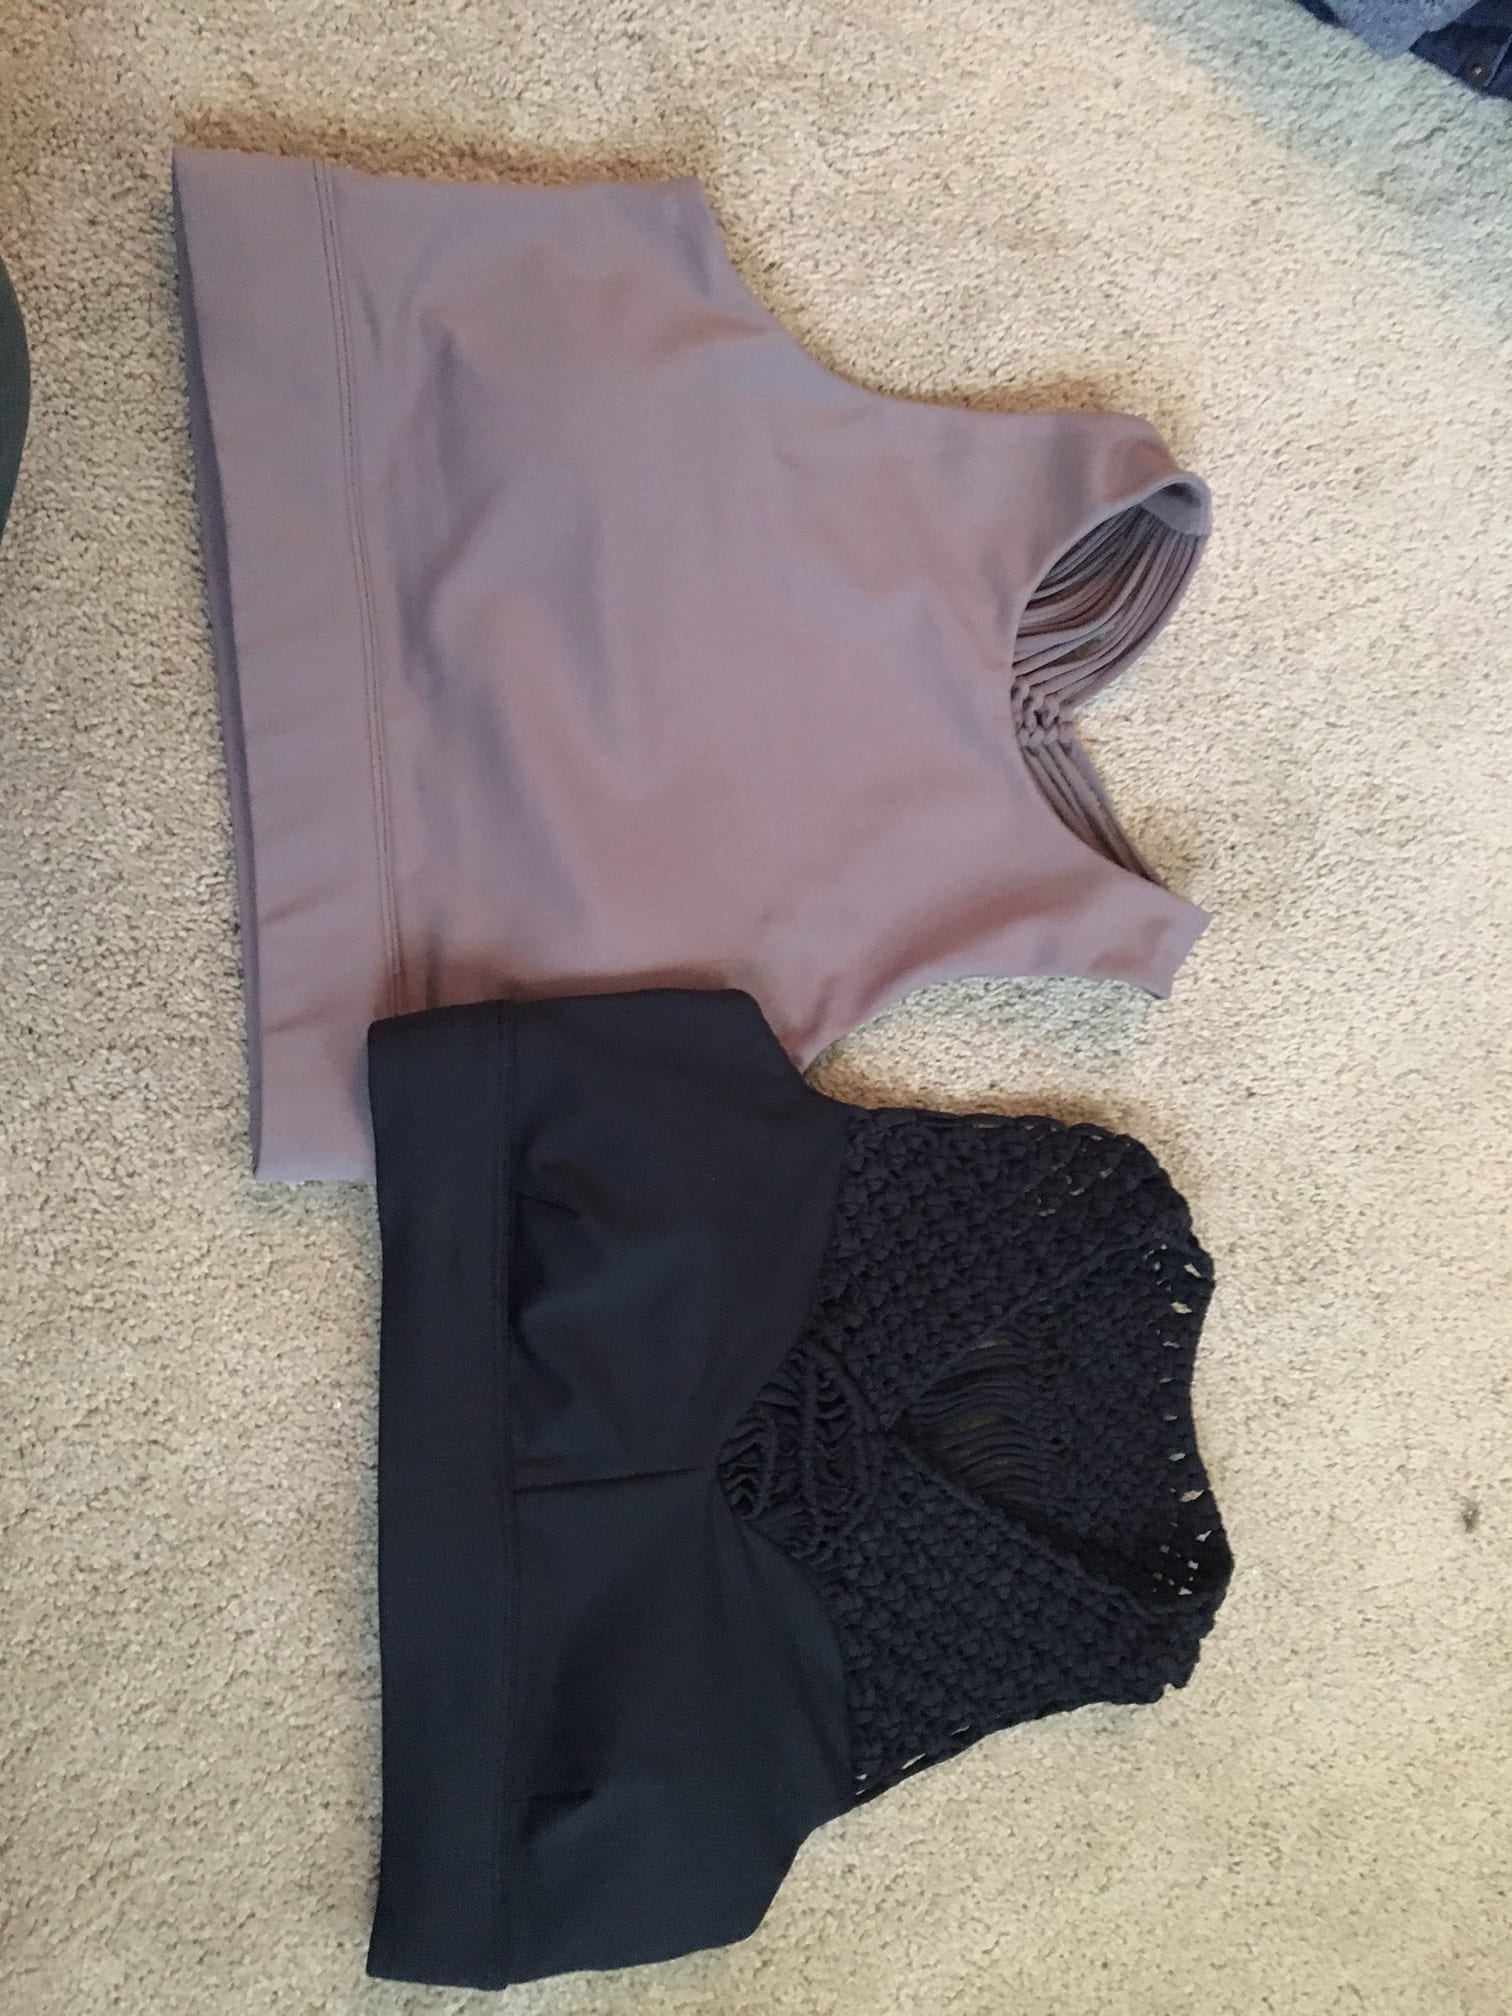 Fit Review- Carbon38 Sayang Collection! Gili Hoodie & Lovina Tank